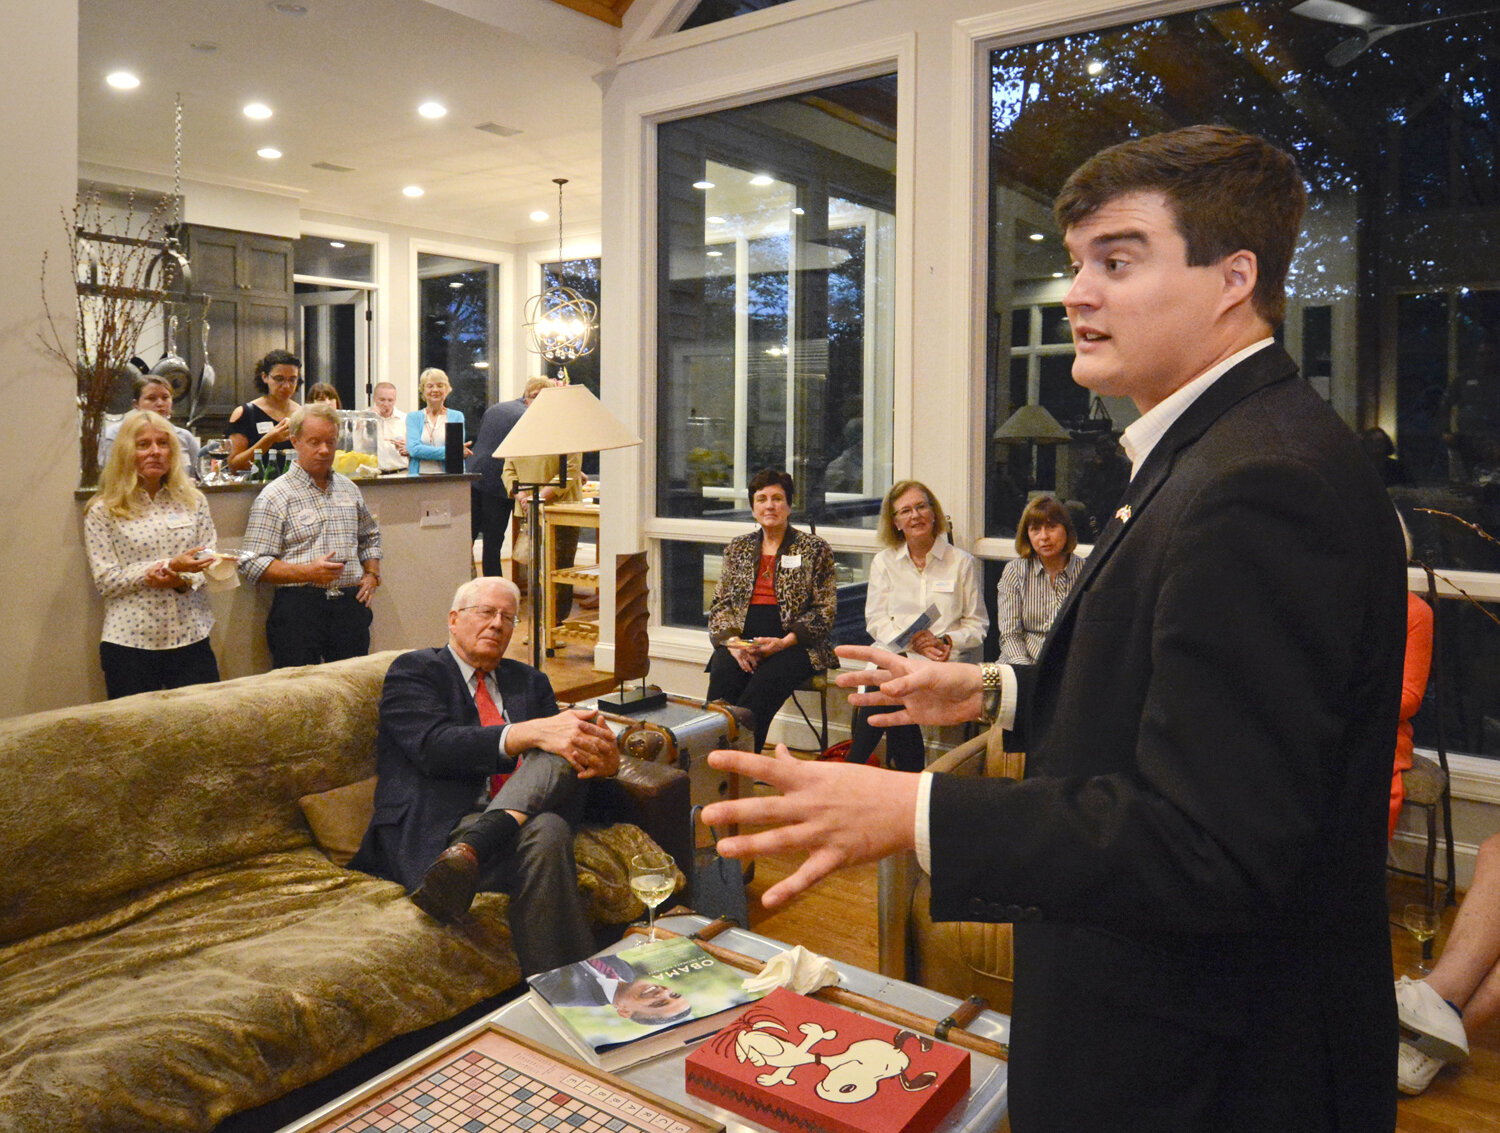  October 9, 2018 Reception and fundraiser Congressman David Price is in the foreground Chatham County, NC 